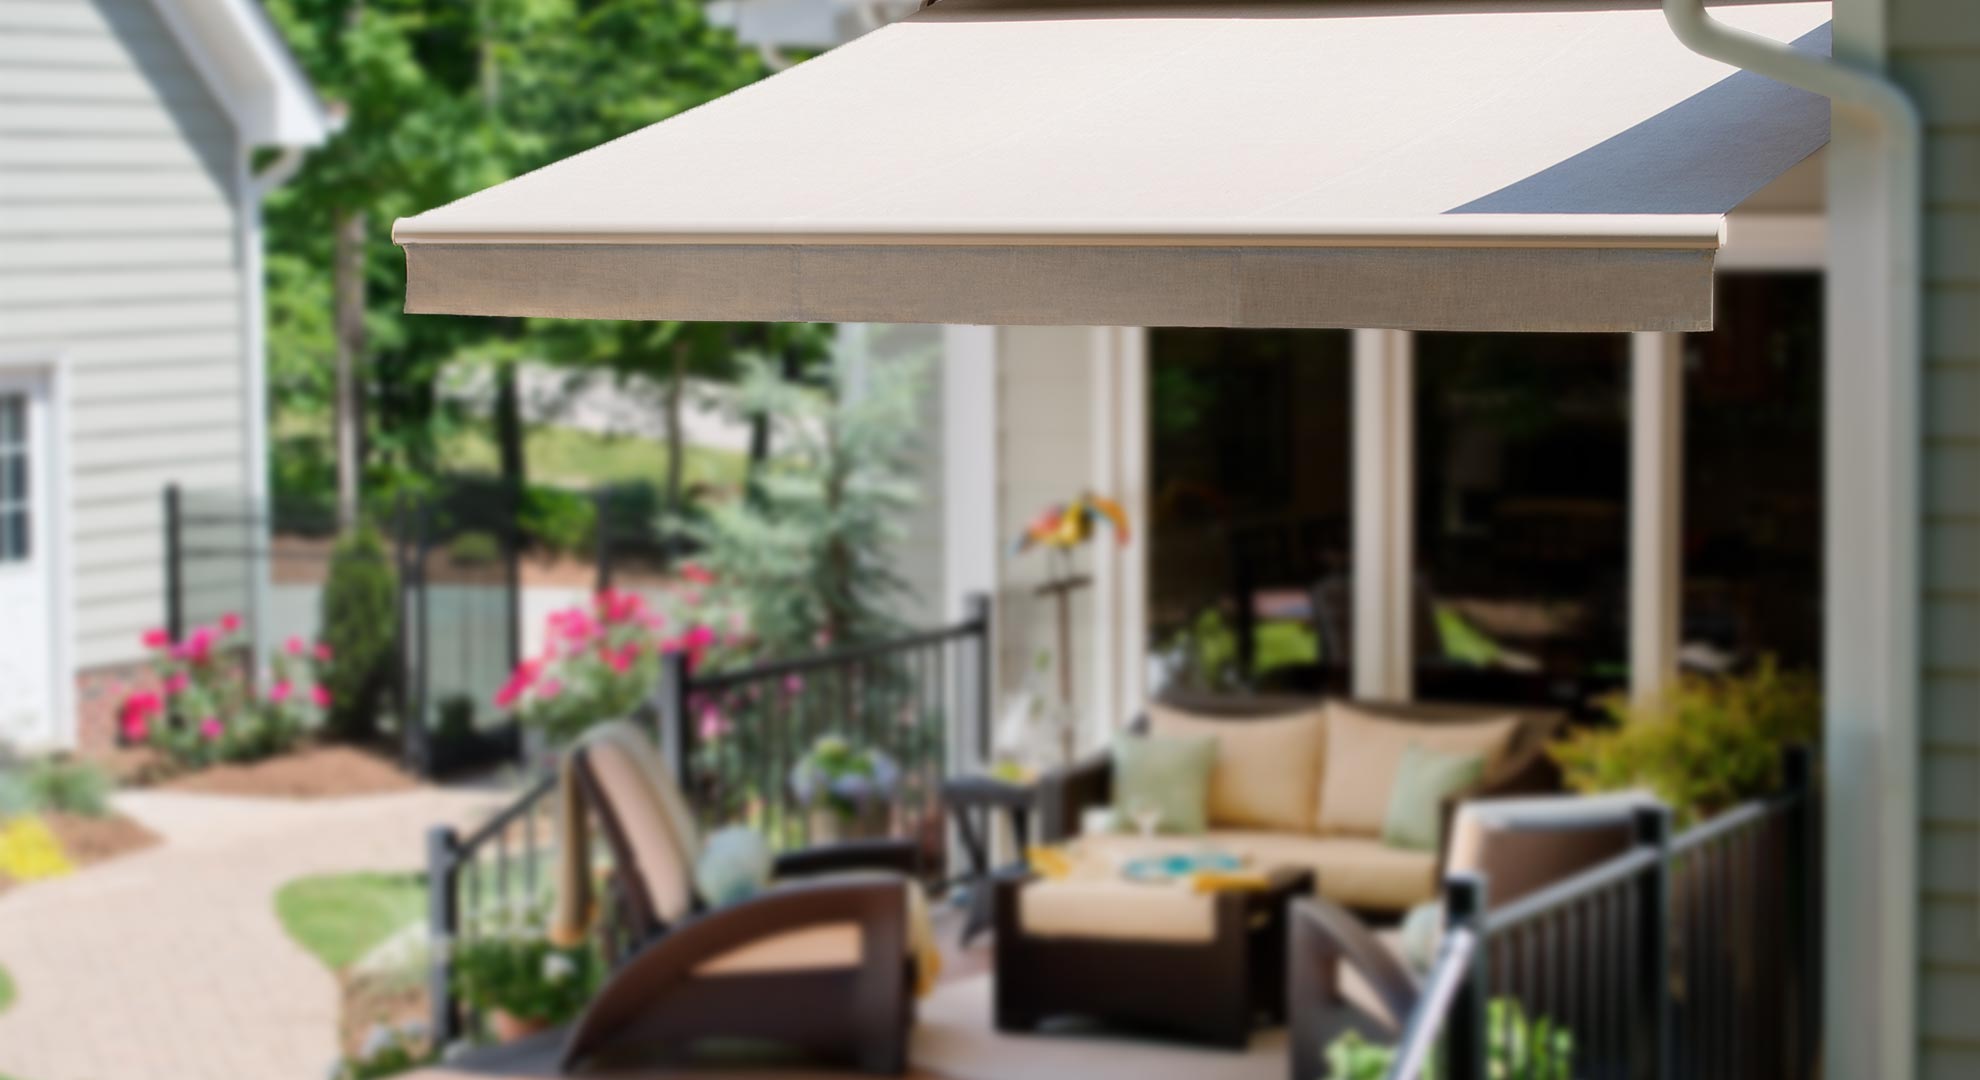 Retractable Awnings And More From Solair Shade Solutions Solair